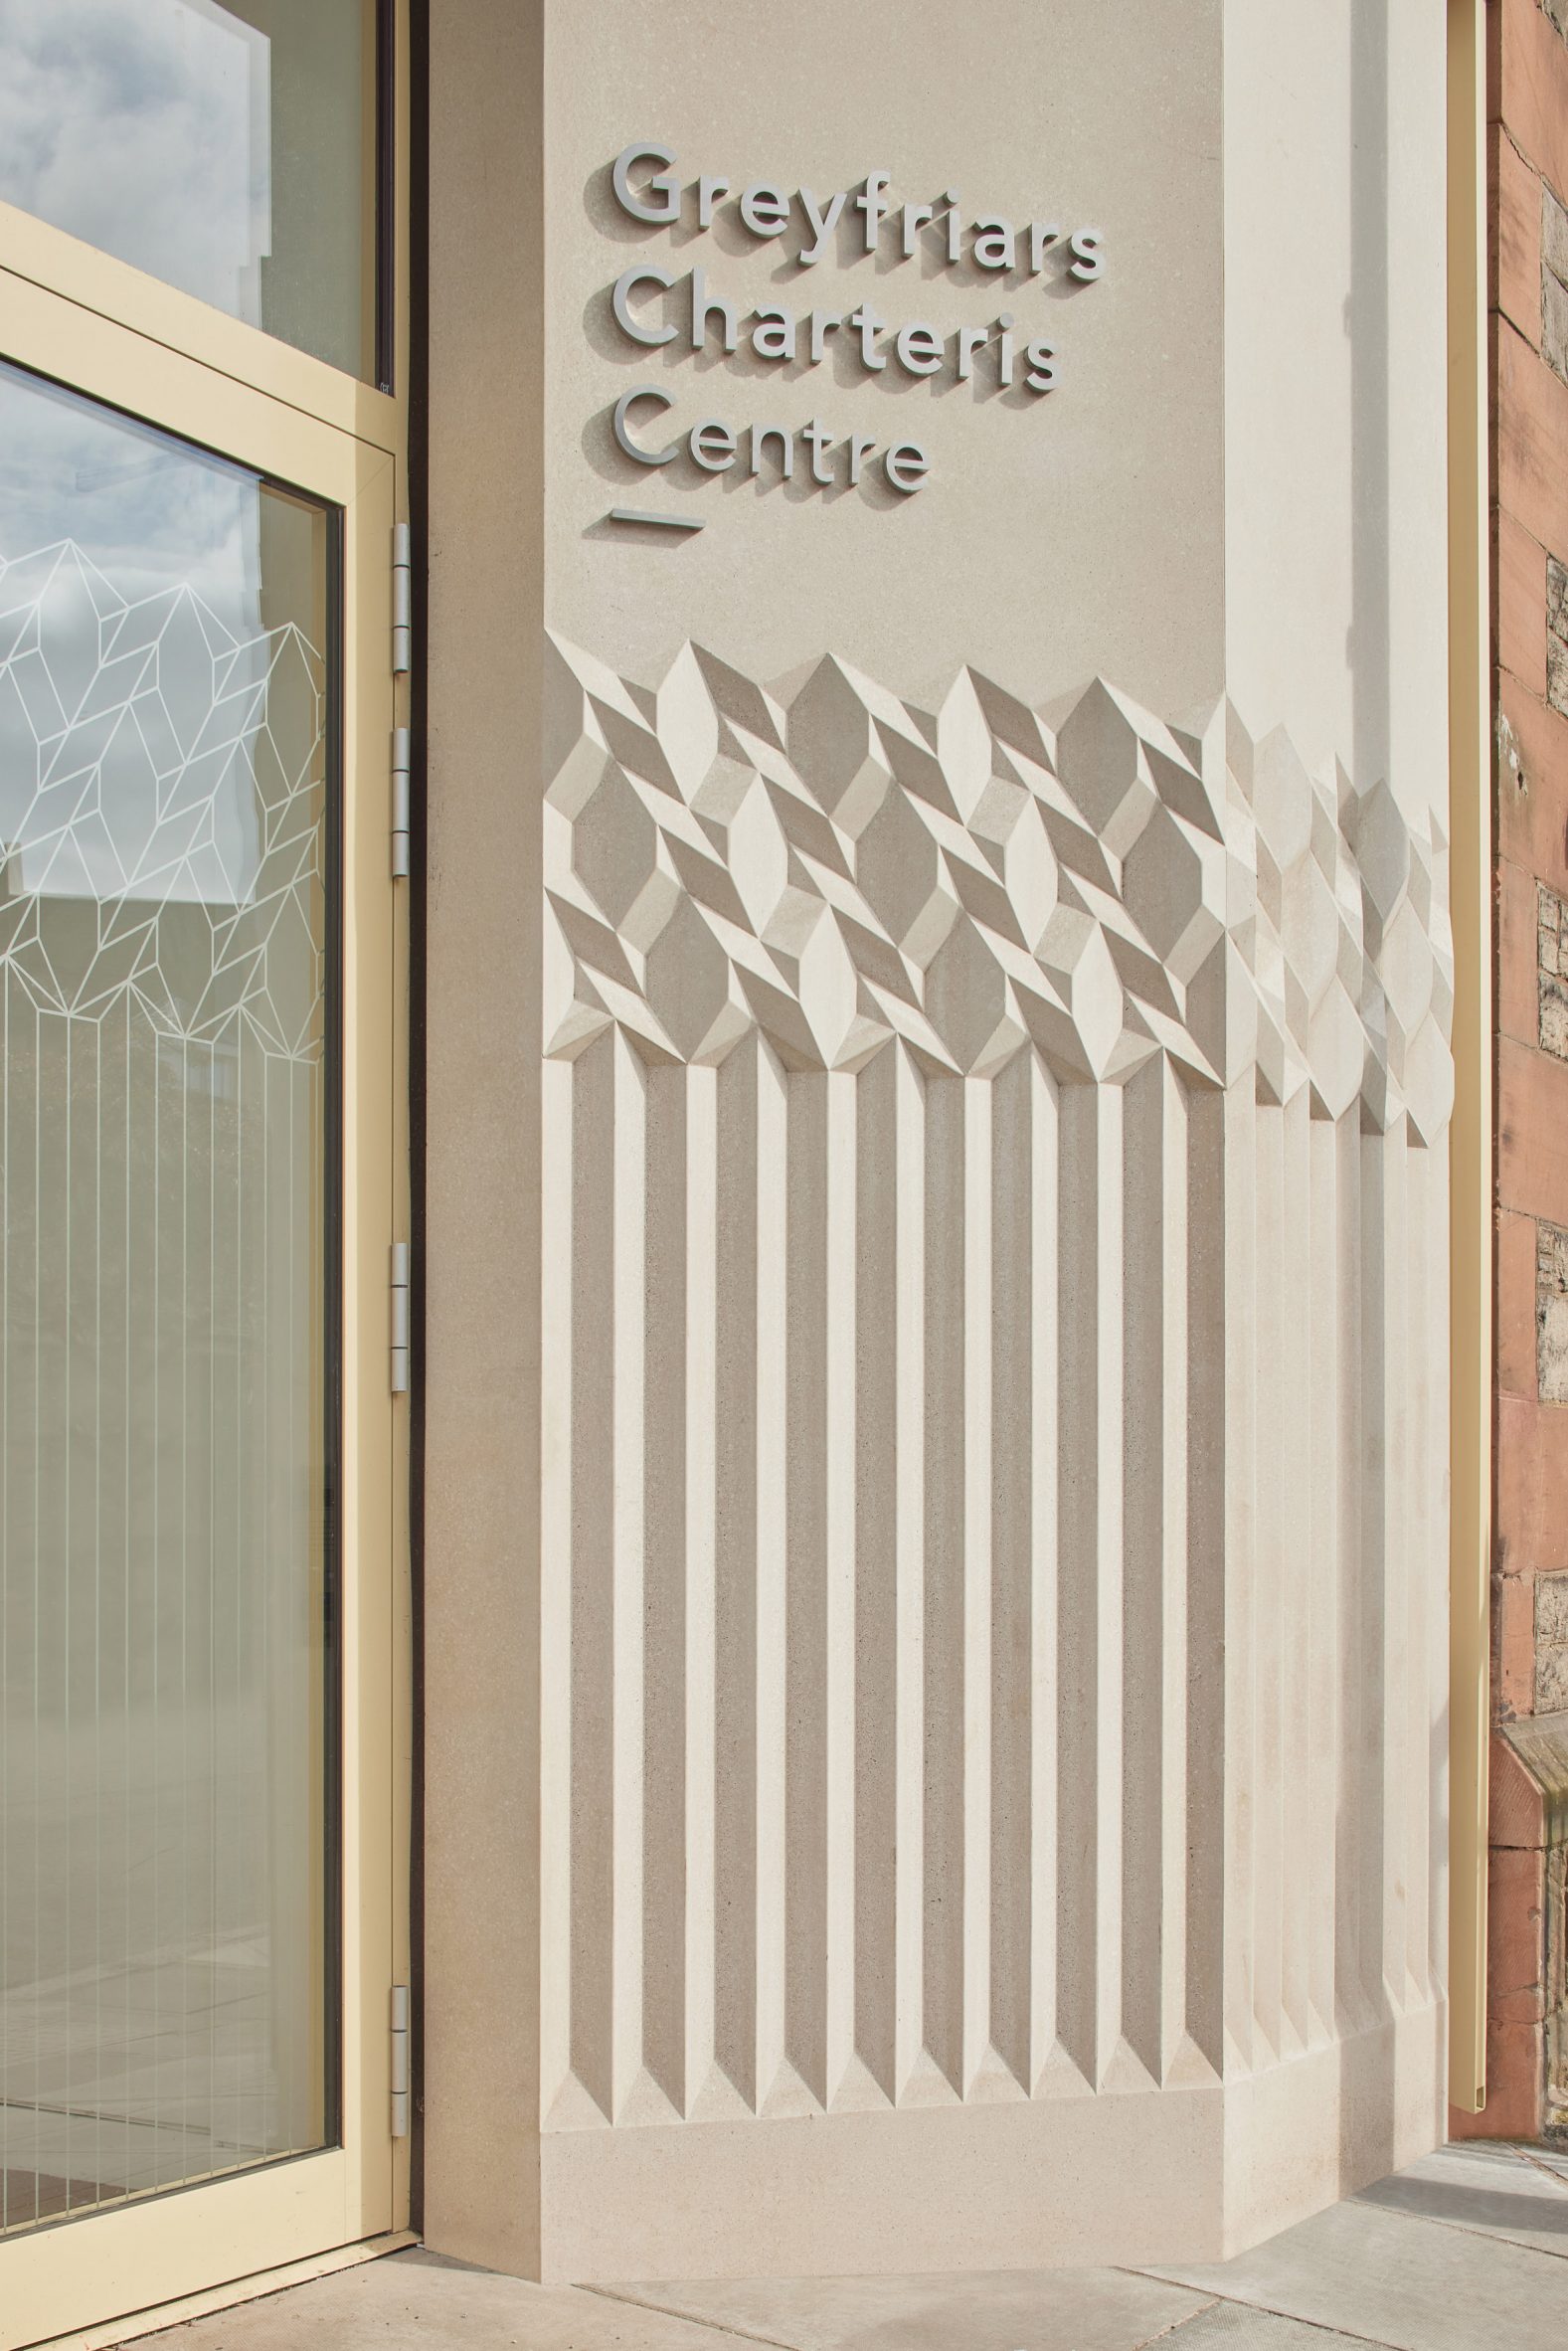 Photograph of carved terrazzo detail outside glazed entrance door